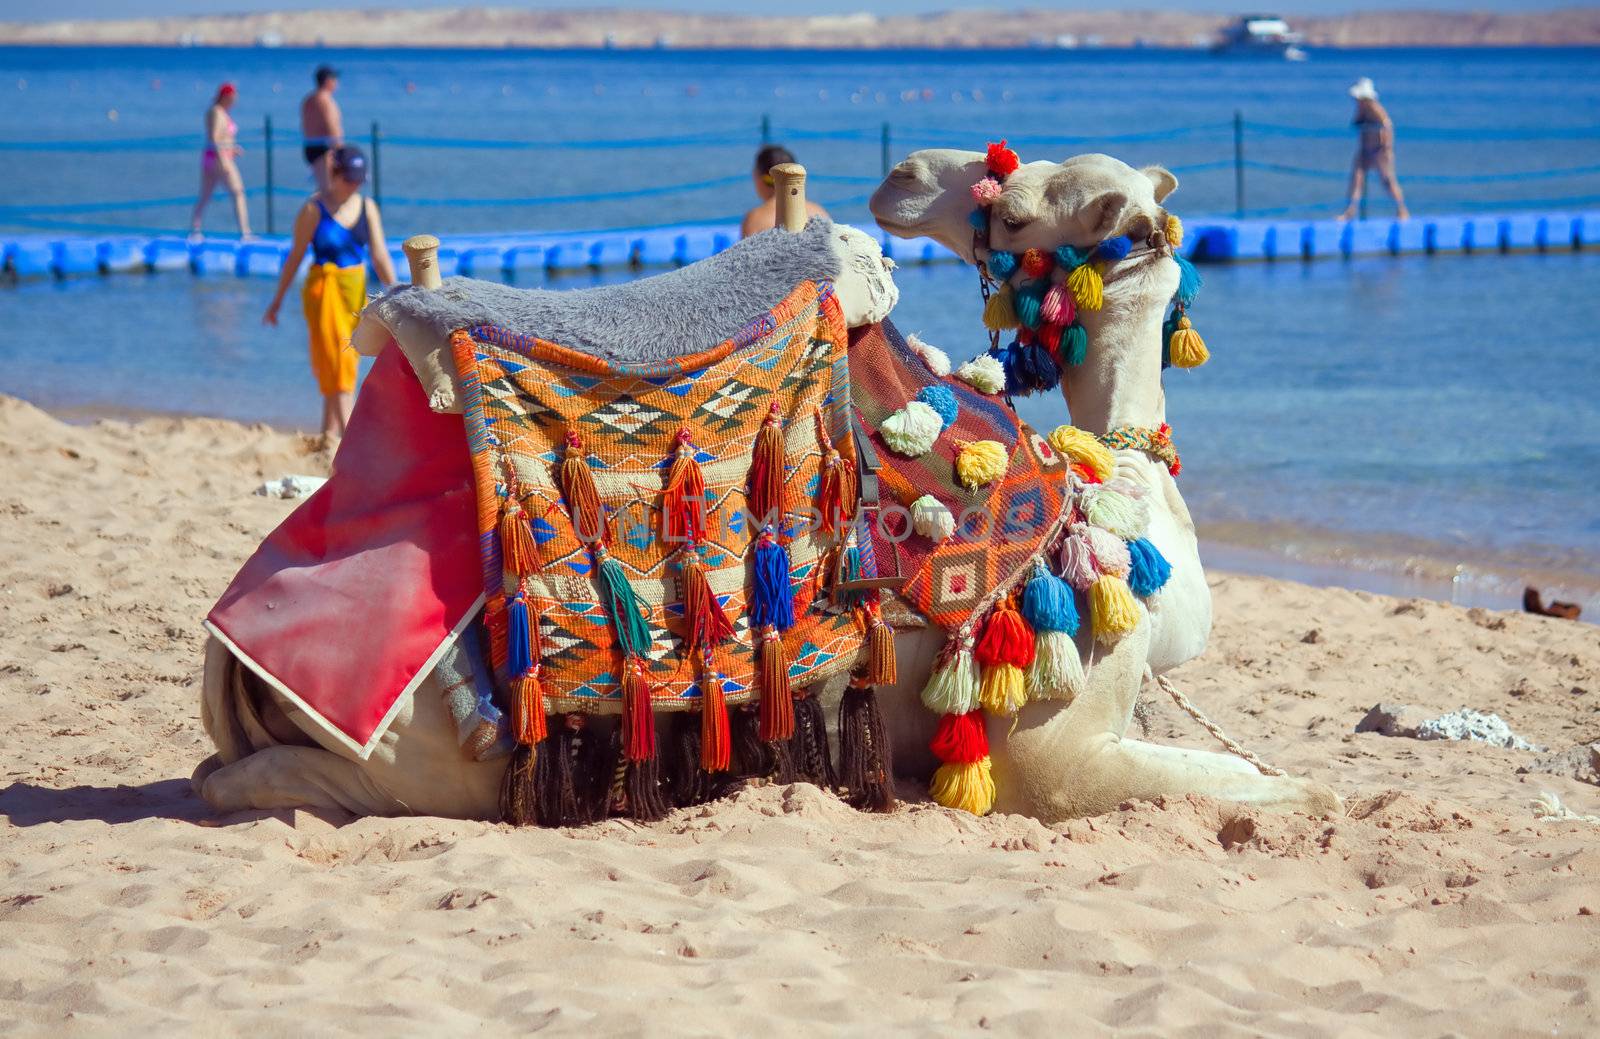 Egypt. On seacoast the camel lies and looks around.